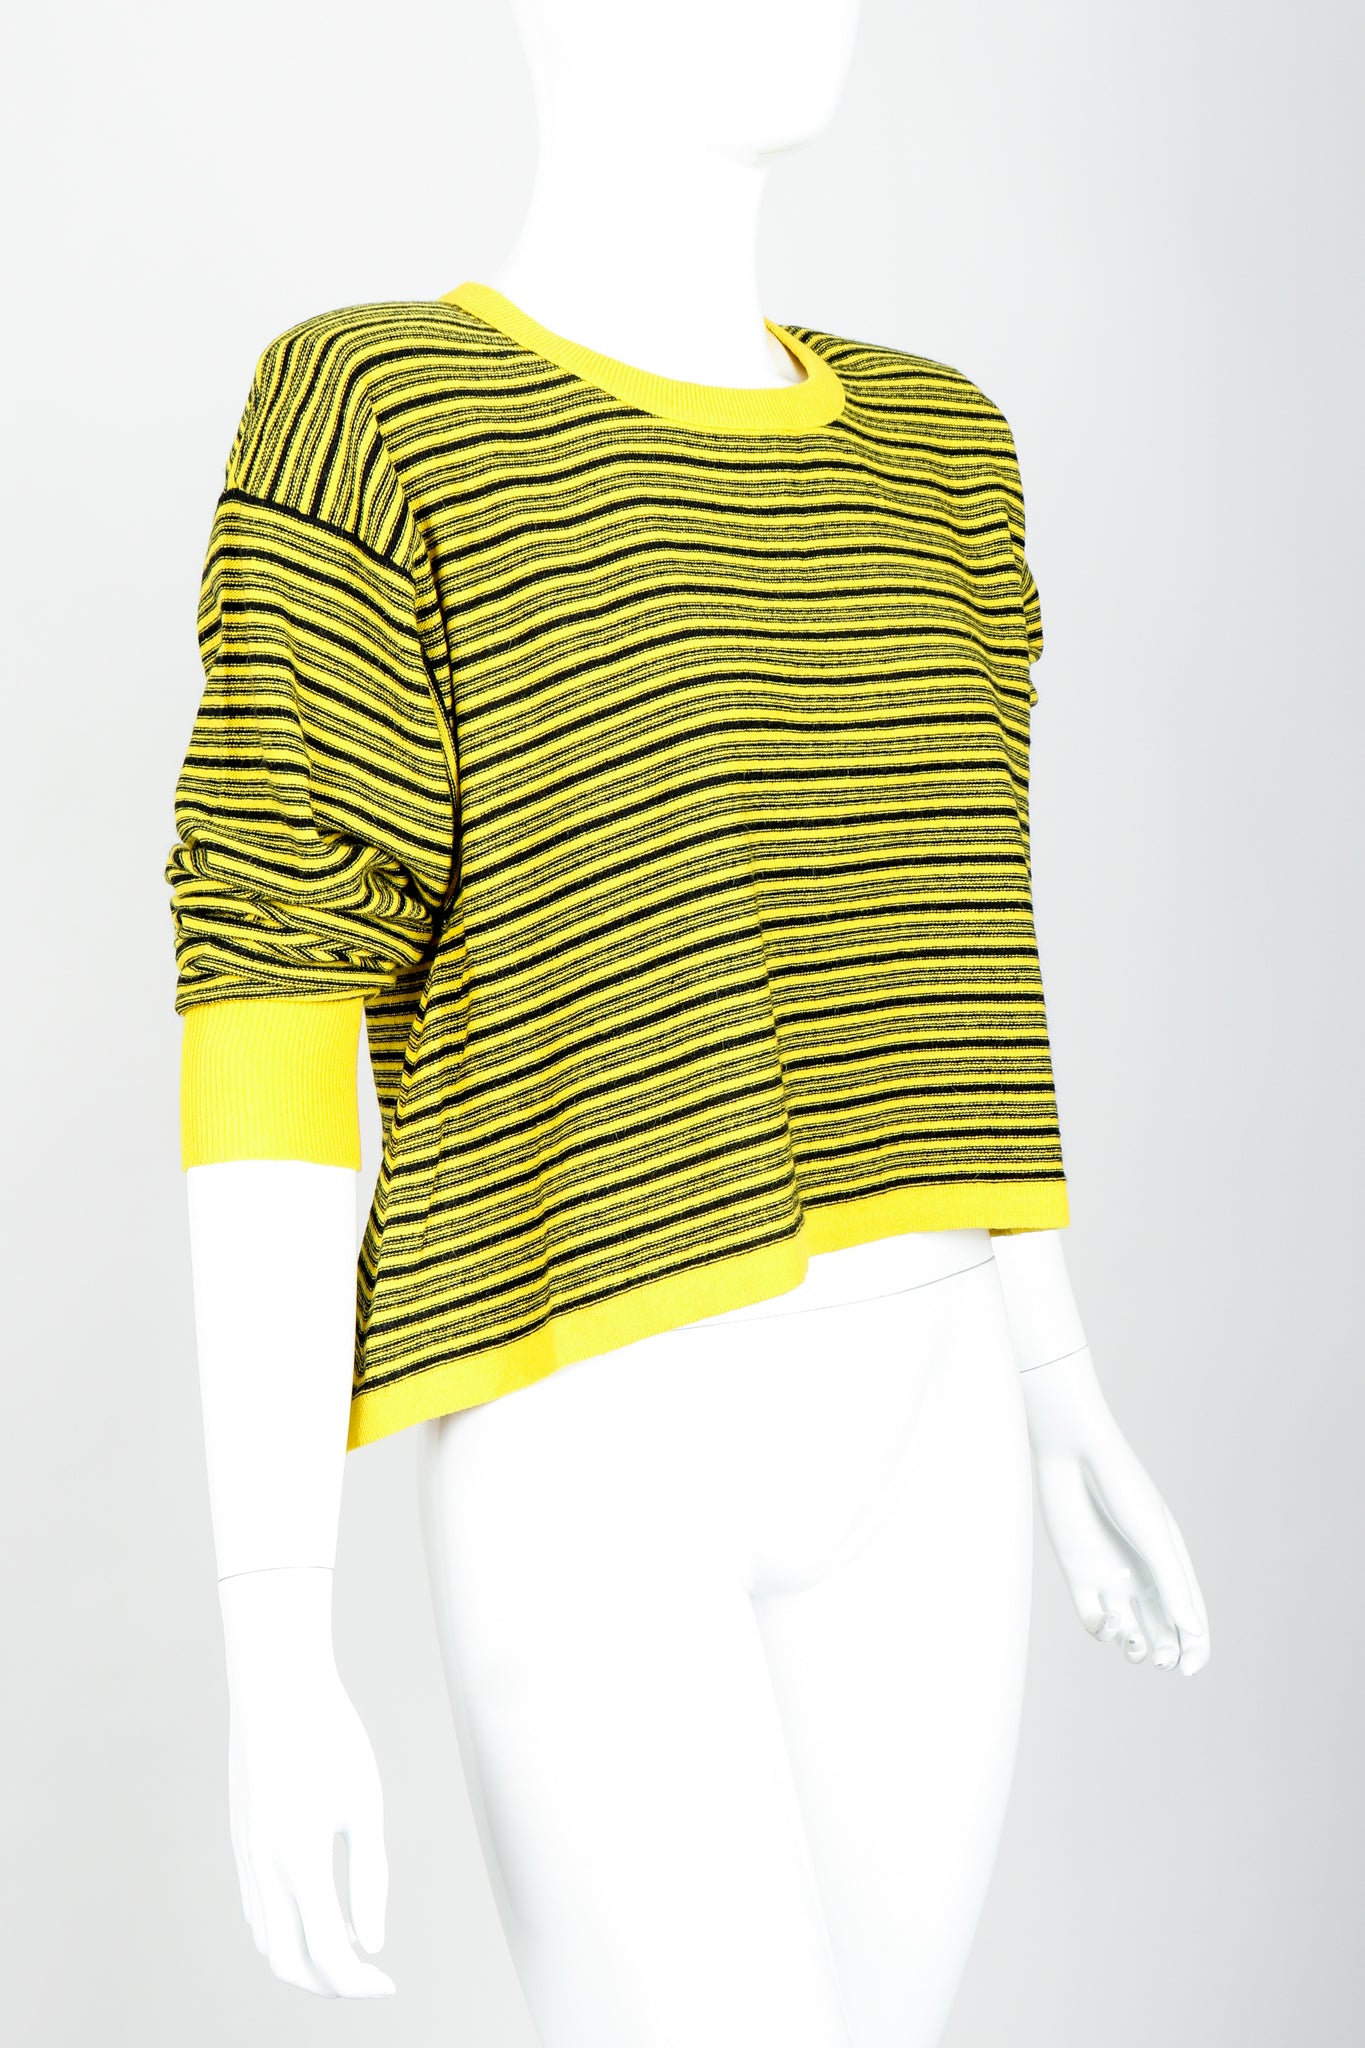 Vintage Sonia Rykiel Yellow Stripe Knit Boxy Sweater on Mannequin Sleeves pushed at Recess